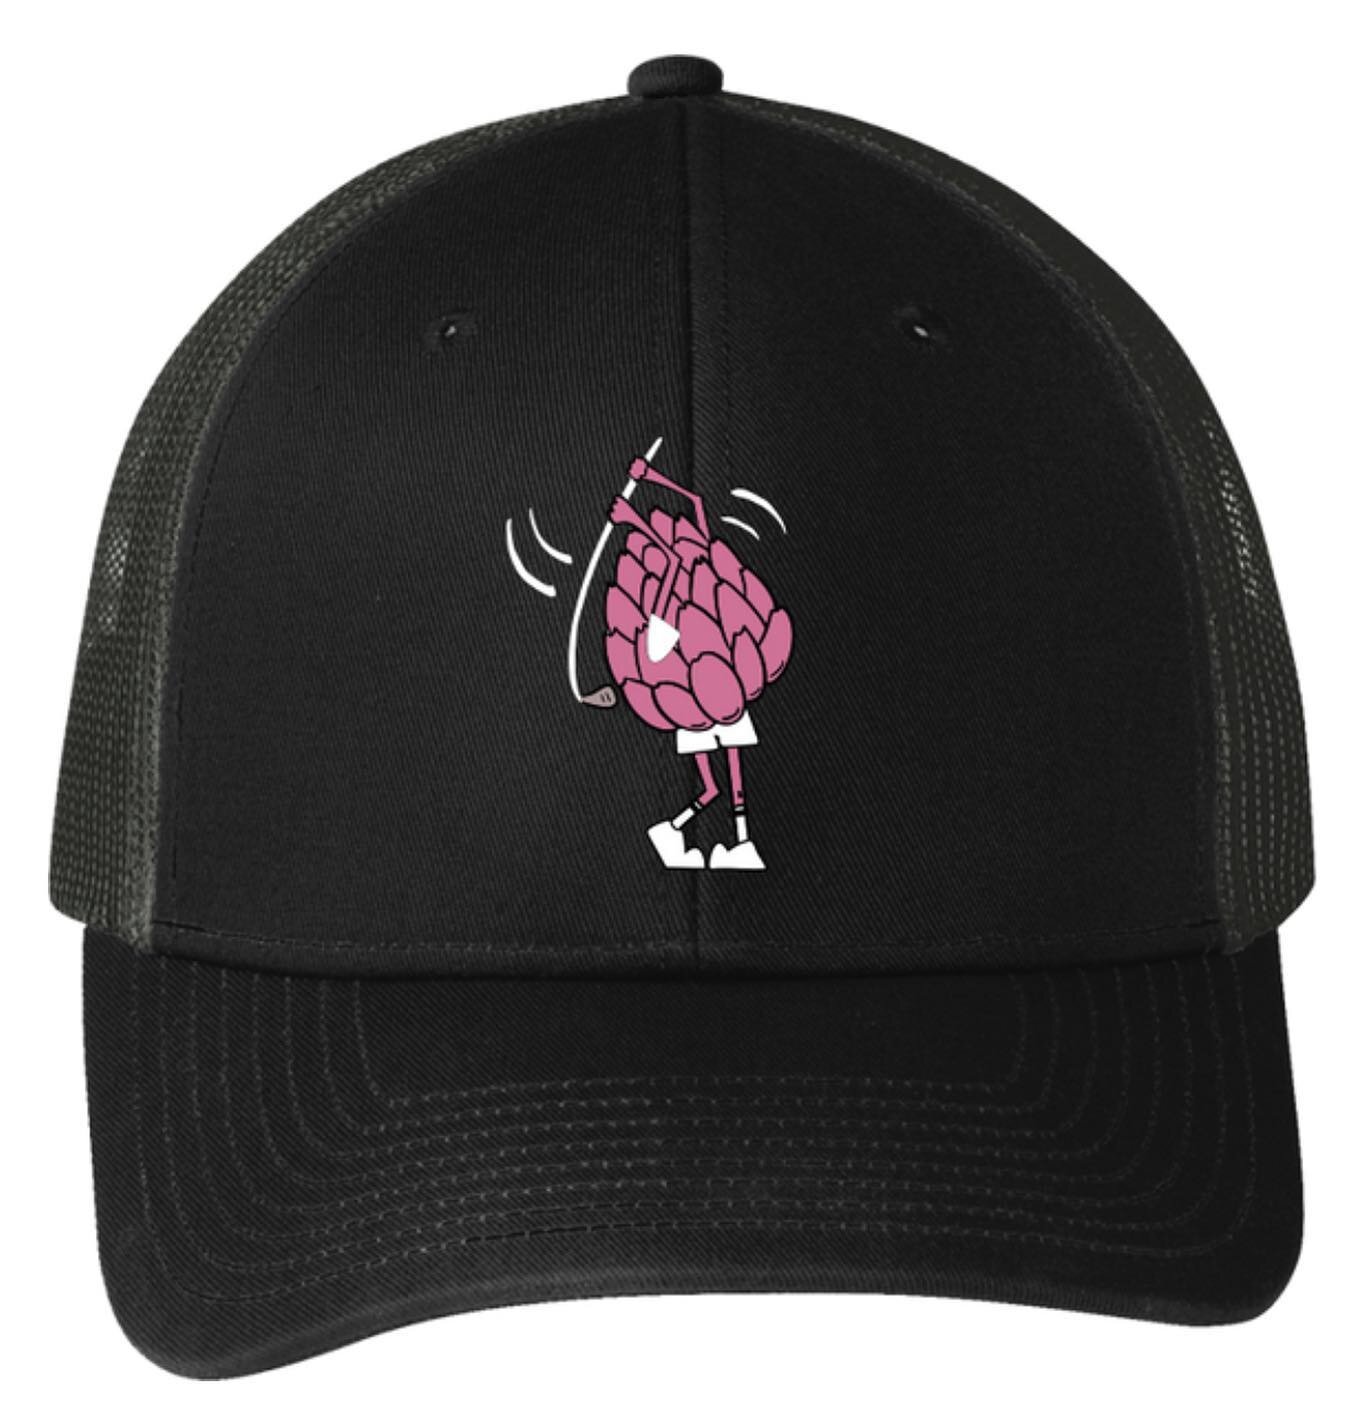 As requested, the new &ldquo;Pink&rdquo; hat available now! Thanks to @calogos1 for all the help! Shot a DM or hit the website for details 💪🏽🤘🏽⛳️🏌🏽